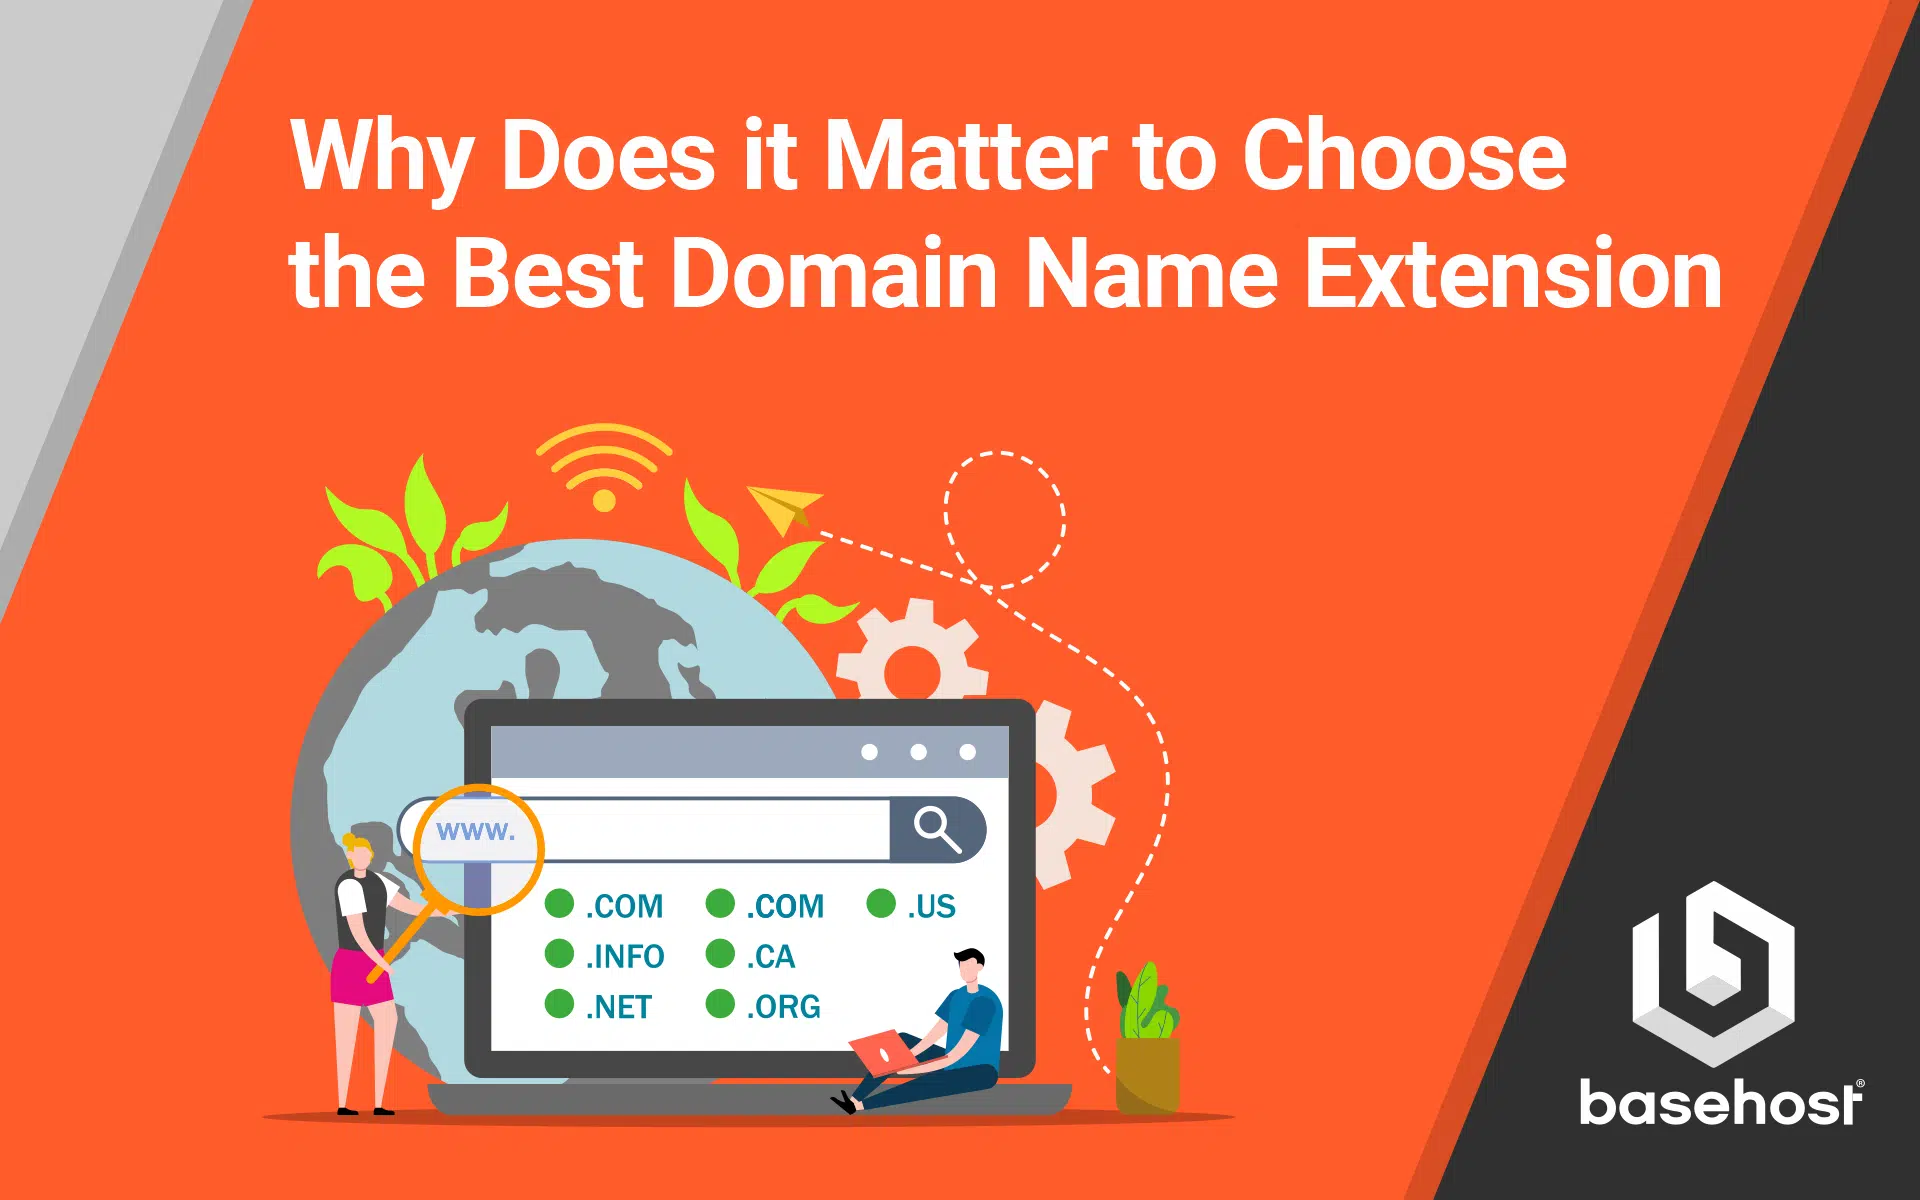 What is domain name and how to choose a best Domain Name